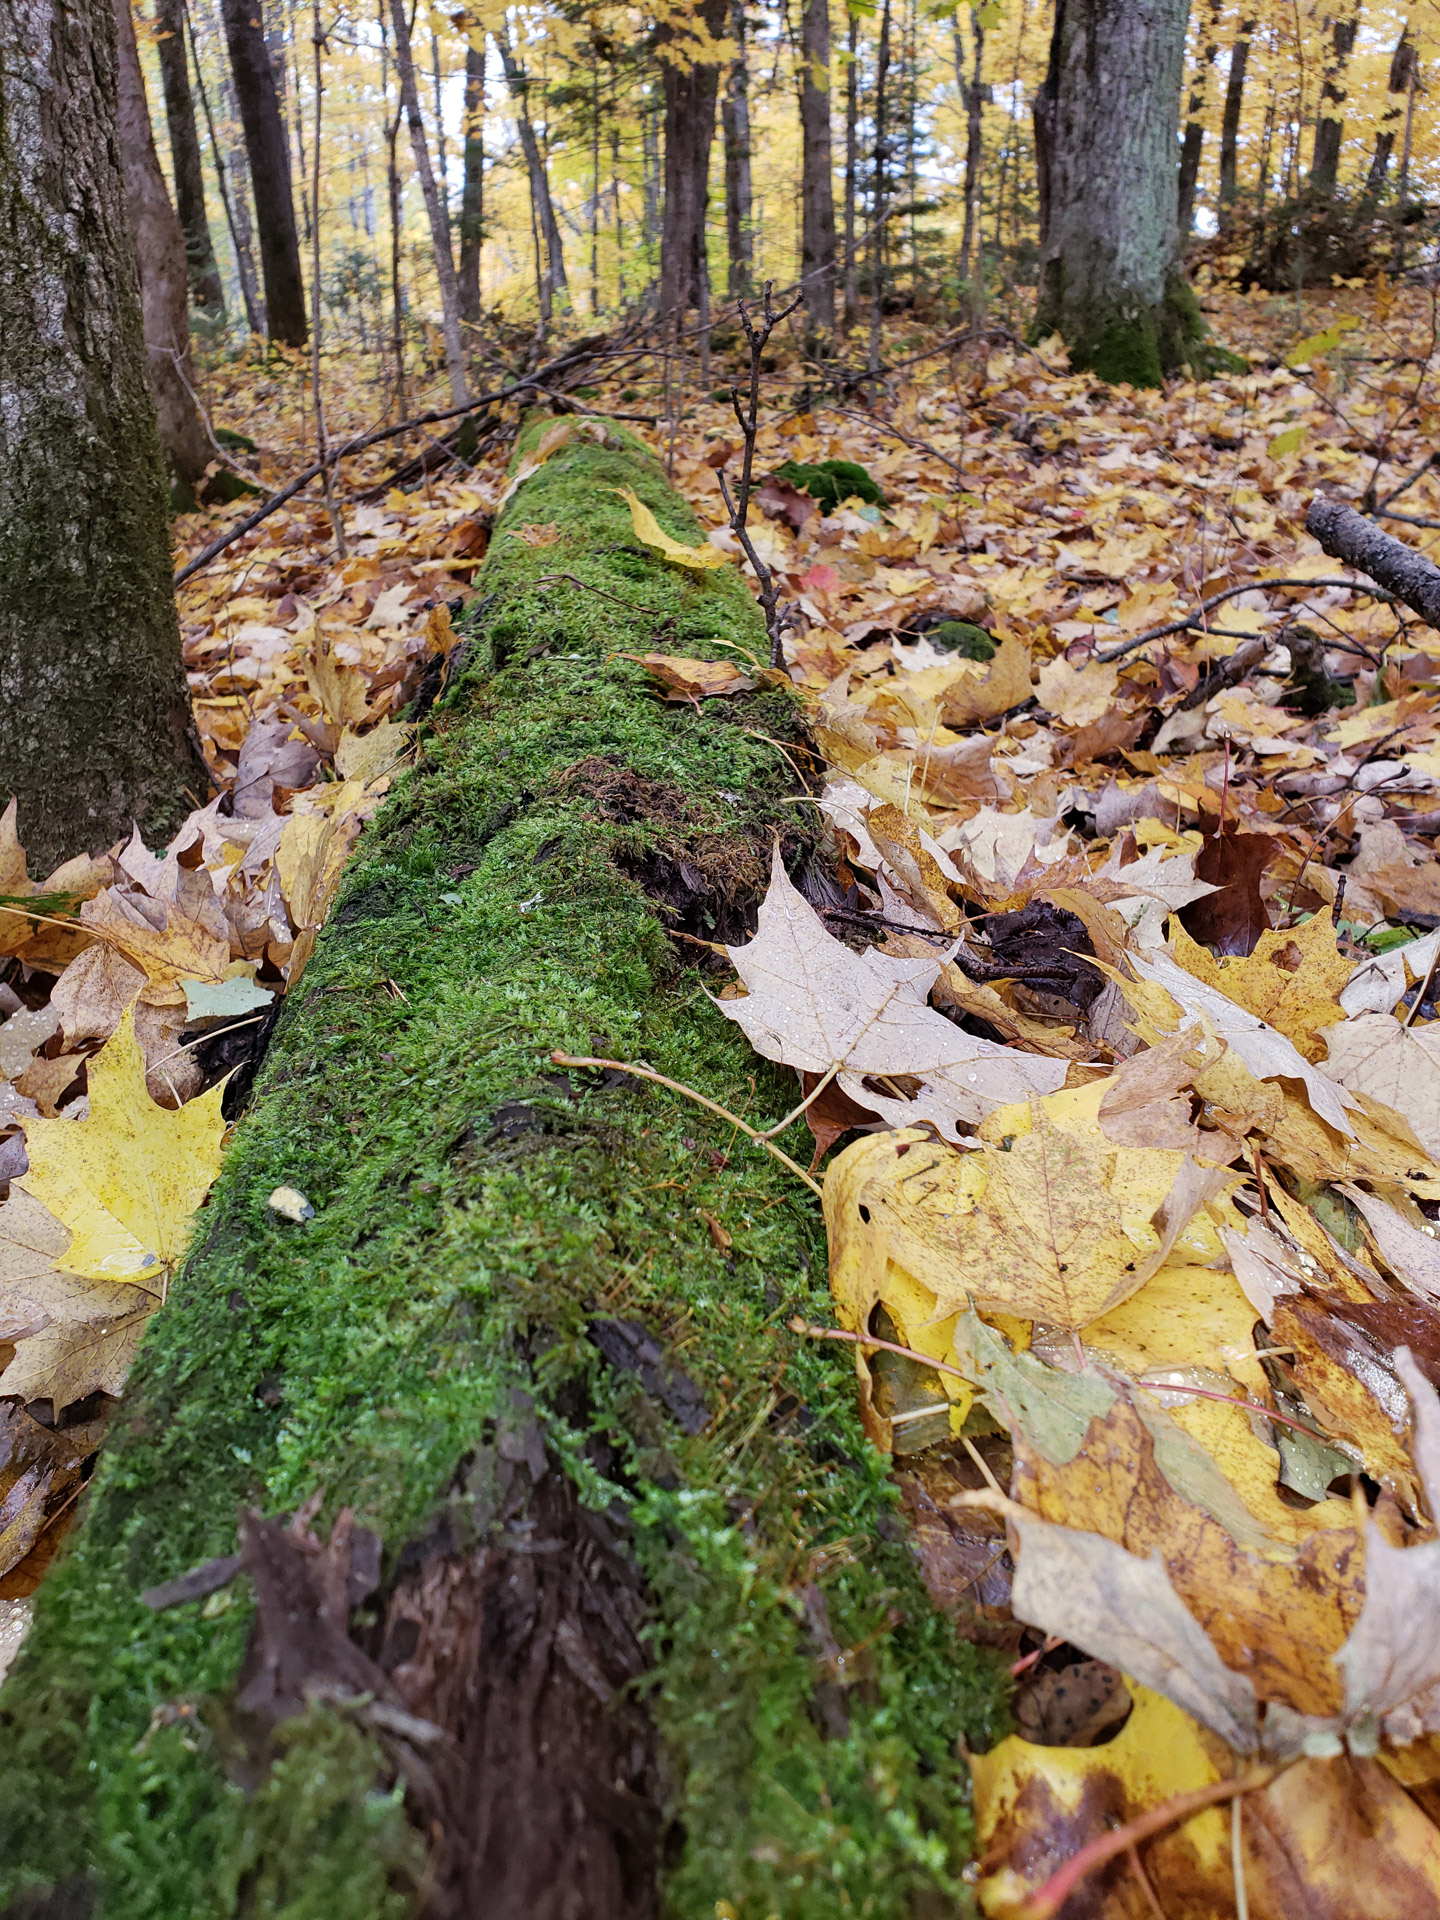 Log Covered In Moss In Fall Leaves